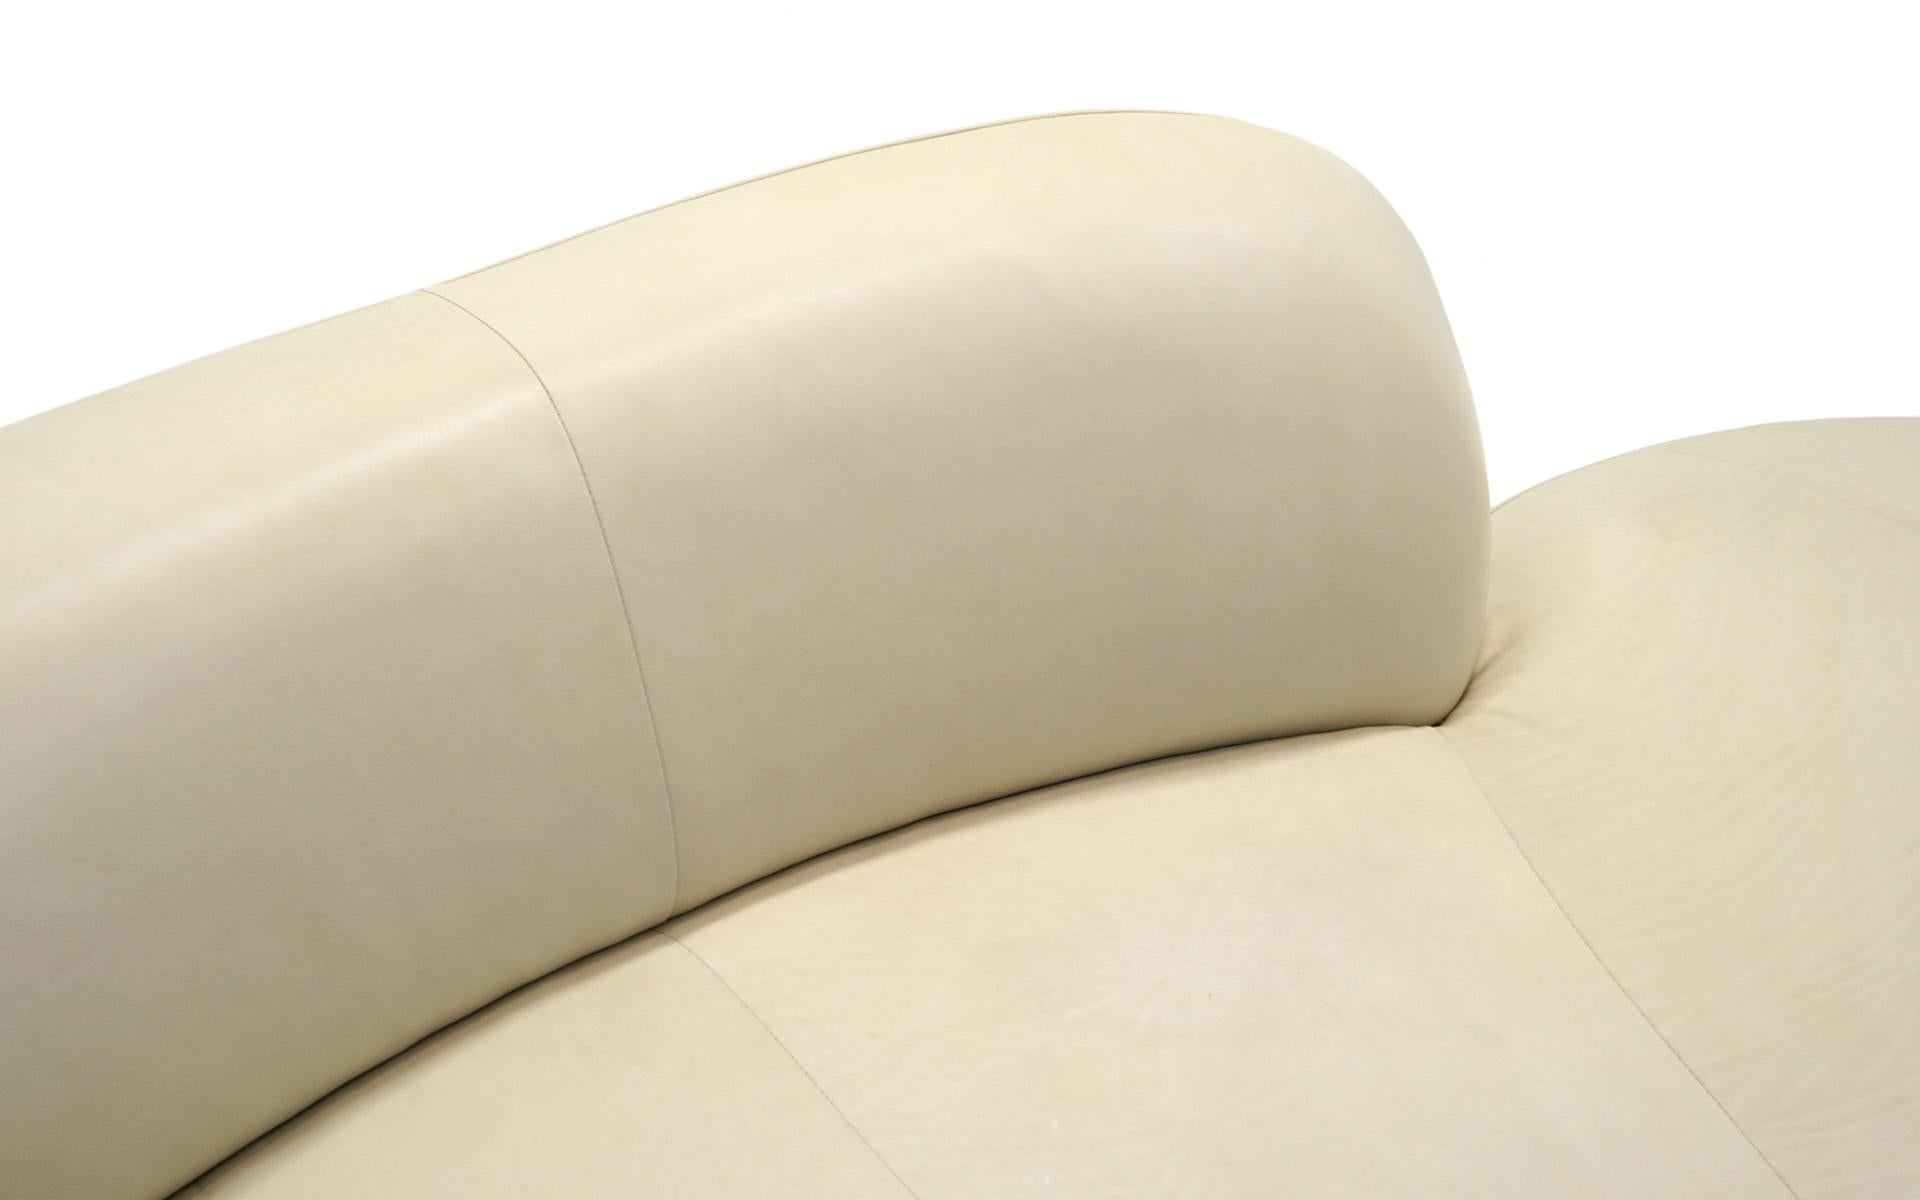 American Pair White / Ivory Curved Leather Zoe Cloud Sofas by Vladimir Kagan, Signed For Sale